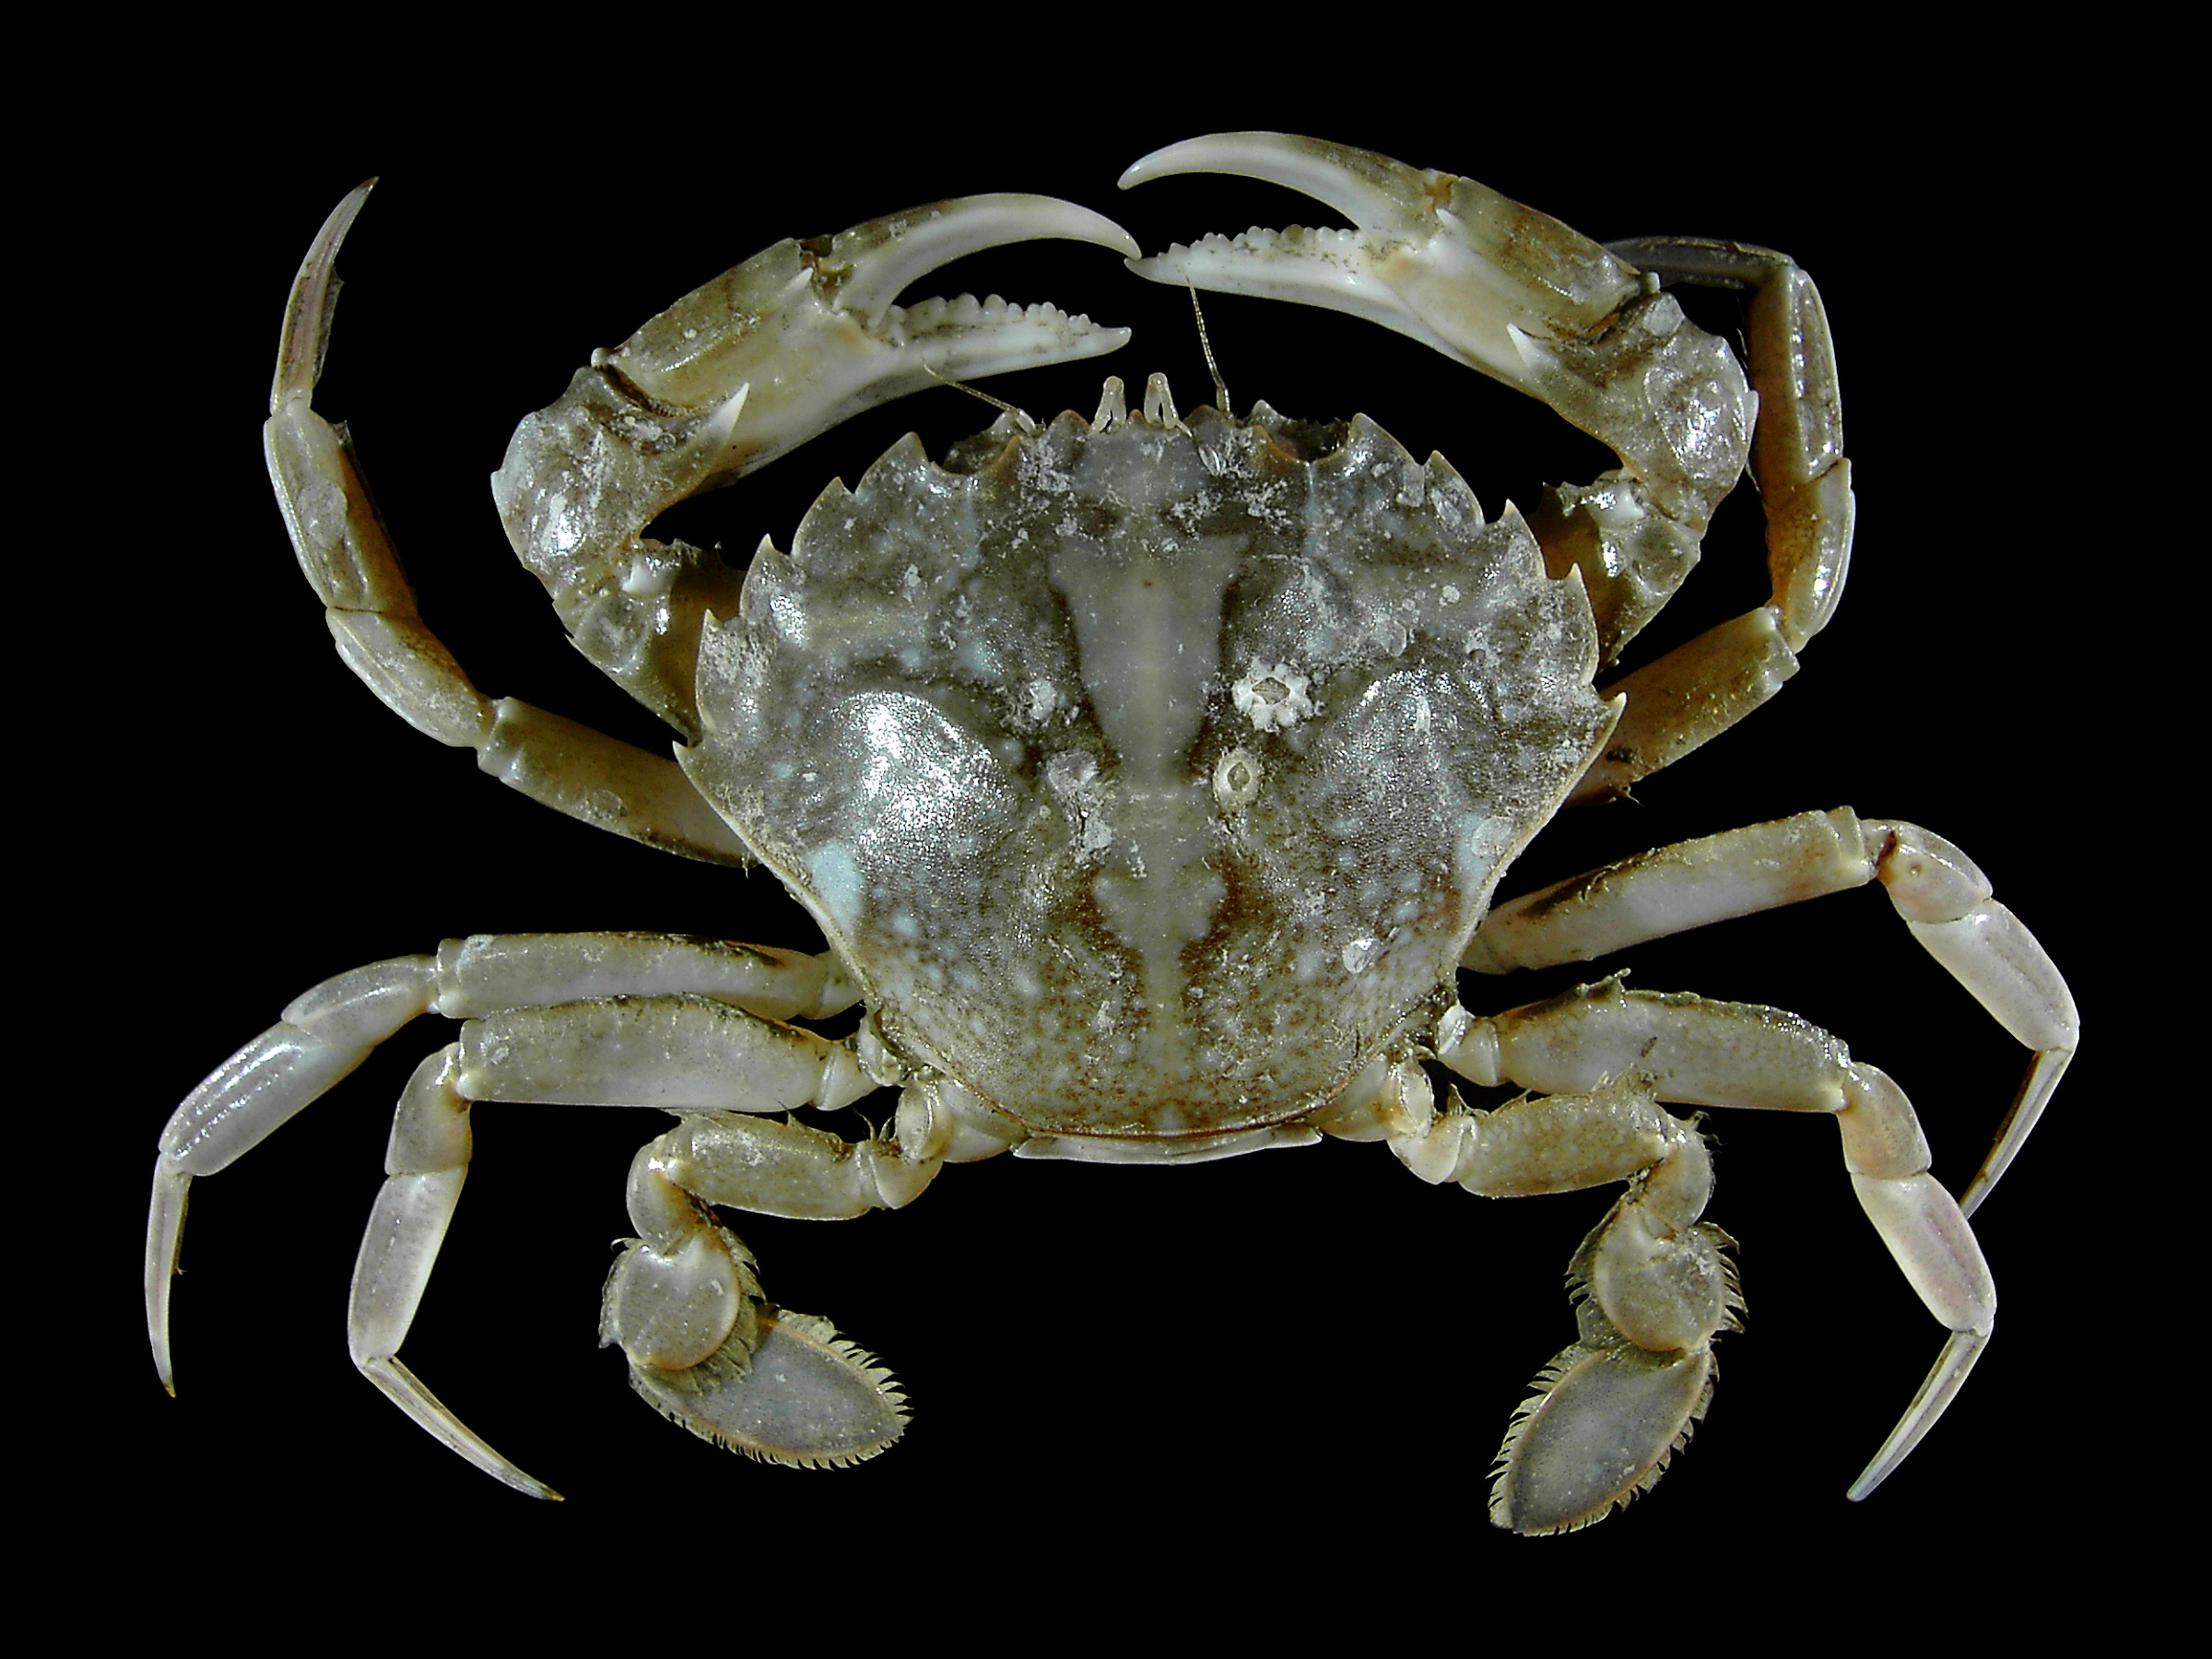 What does a crab look like?